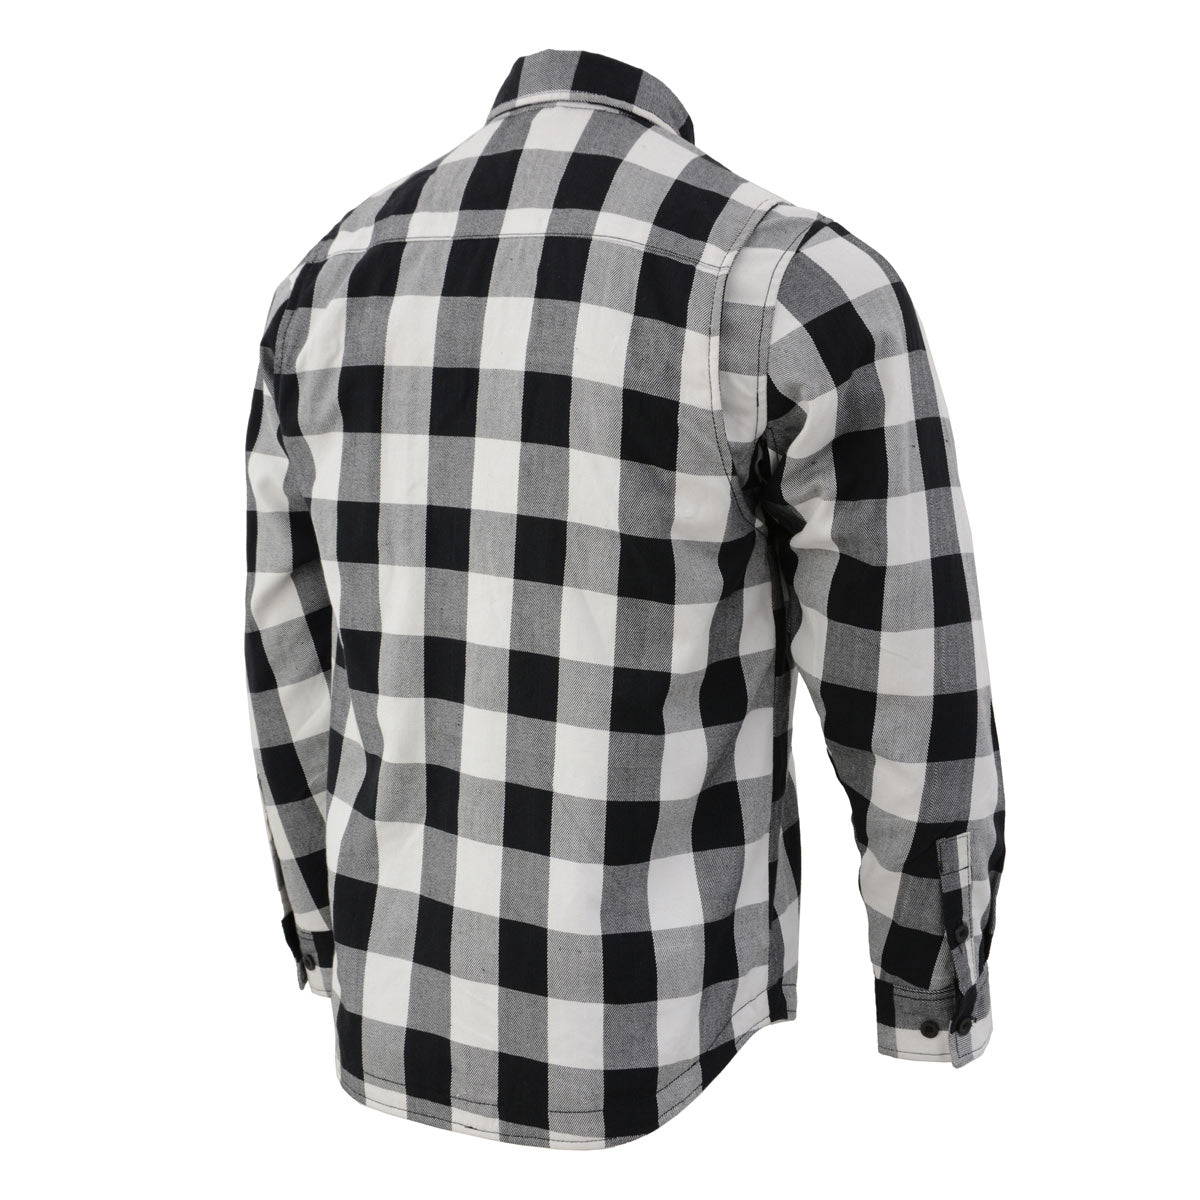 Nexgen Heat Men's Nxm1601set-'Riffraff' Black and White Heated Flannel Long Sleeve Shirt (Rechargeable Battery Pack Included)